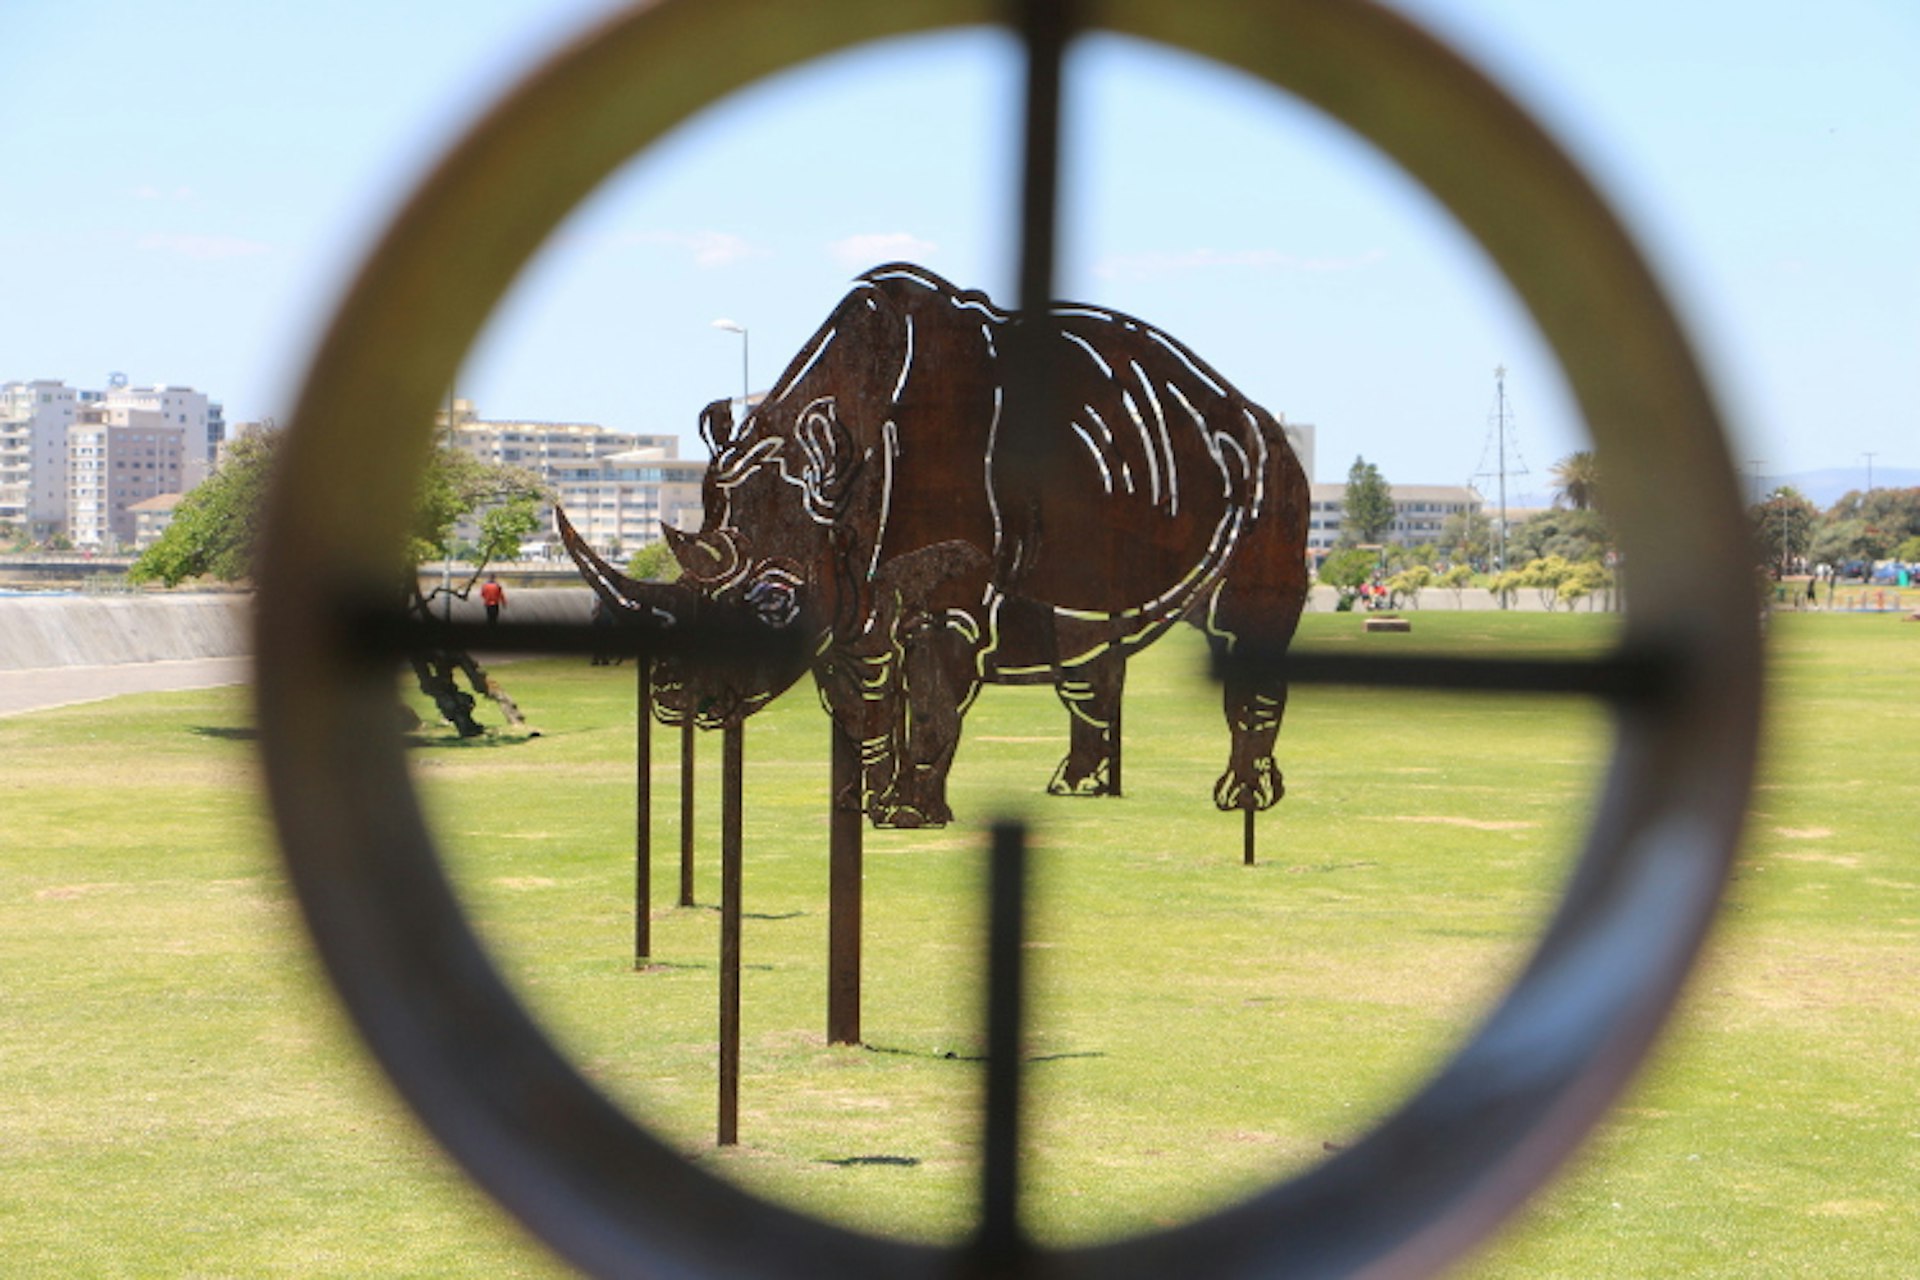 Rhinosaur by Andre Carl van der Merwe; a steel cut-out rhino in the distance sits in the cross hairs